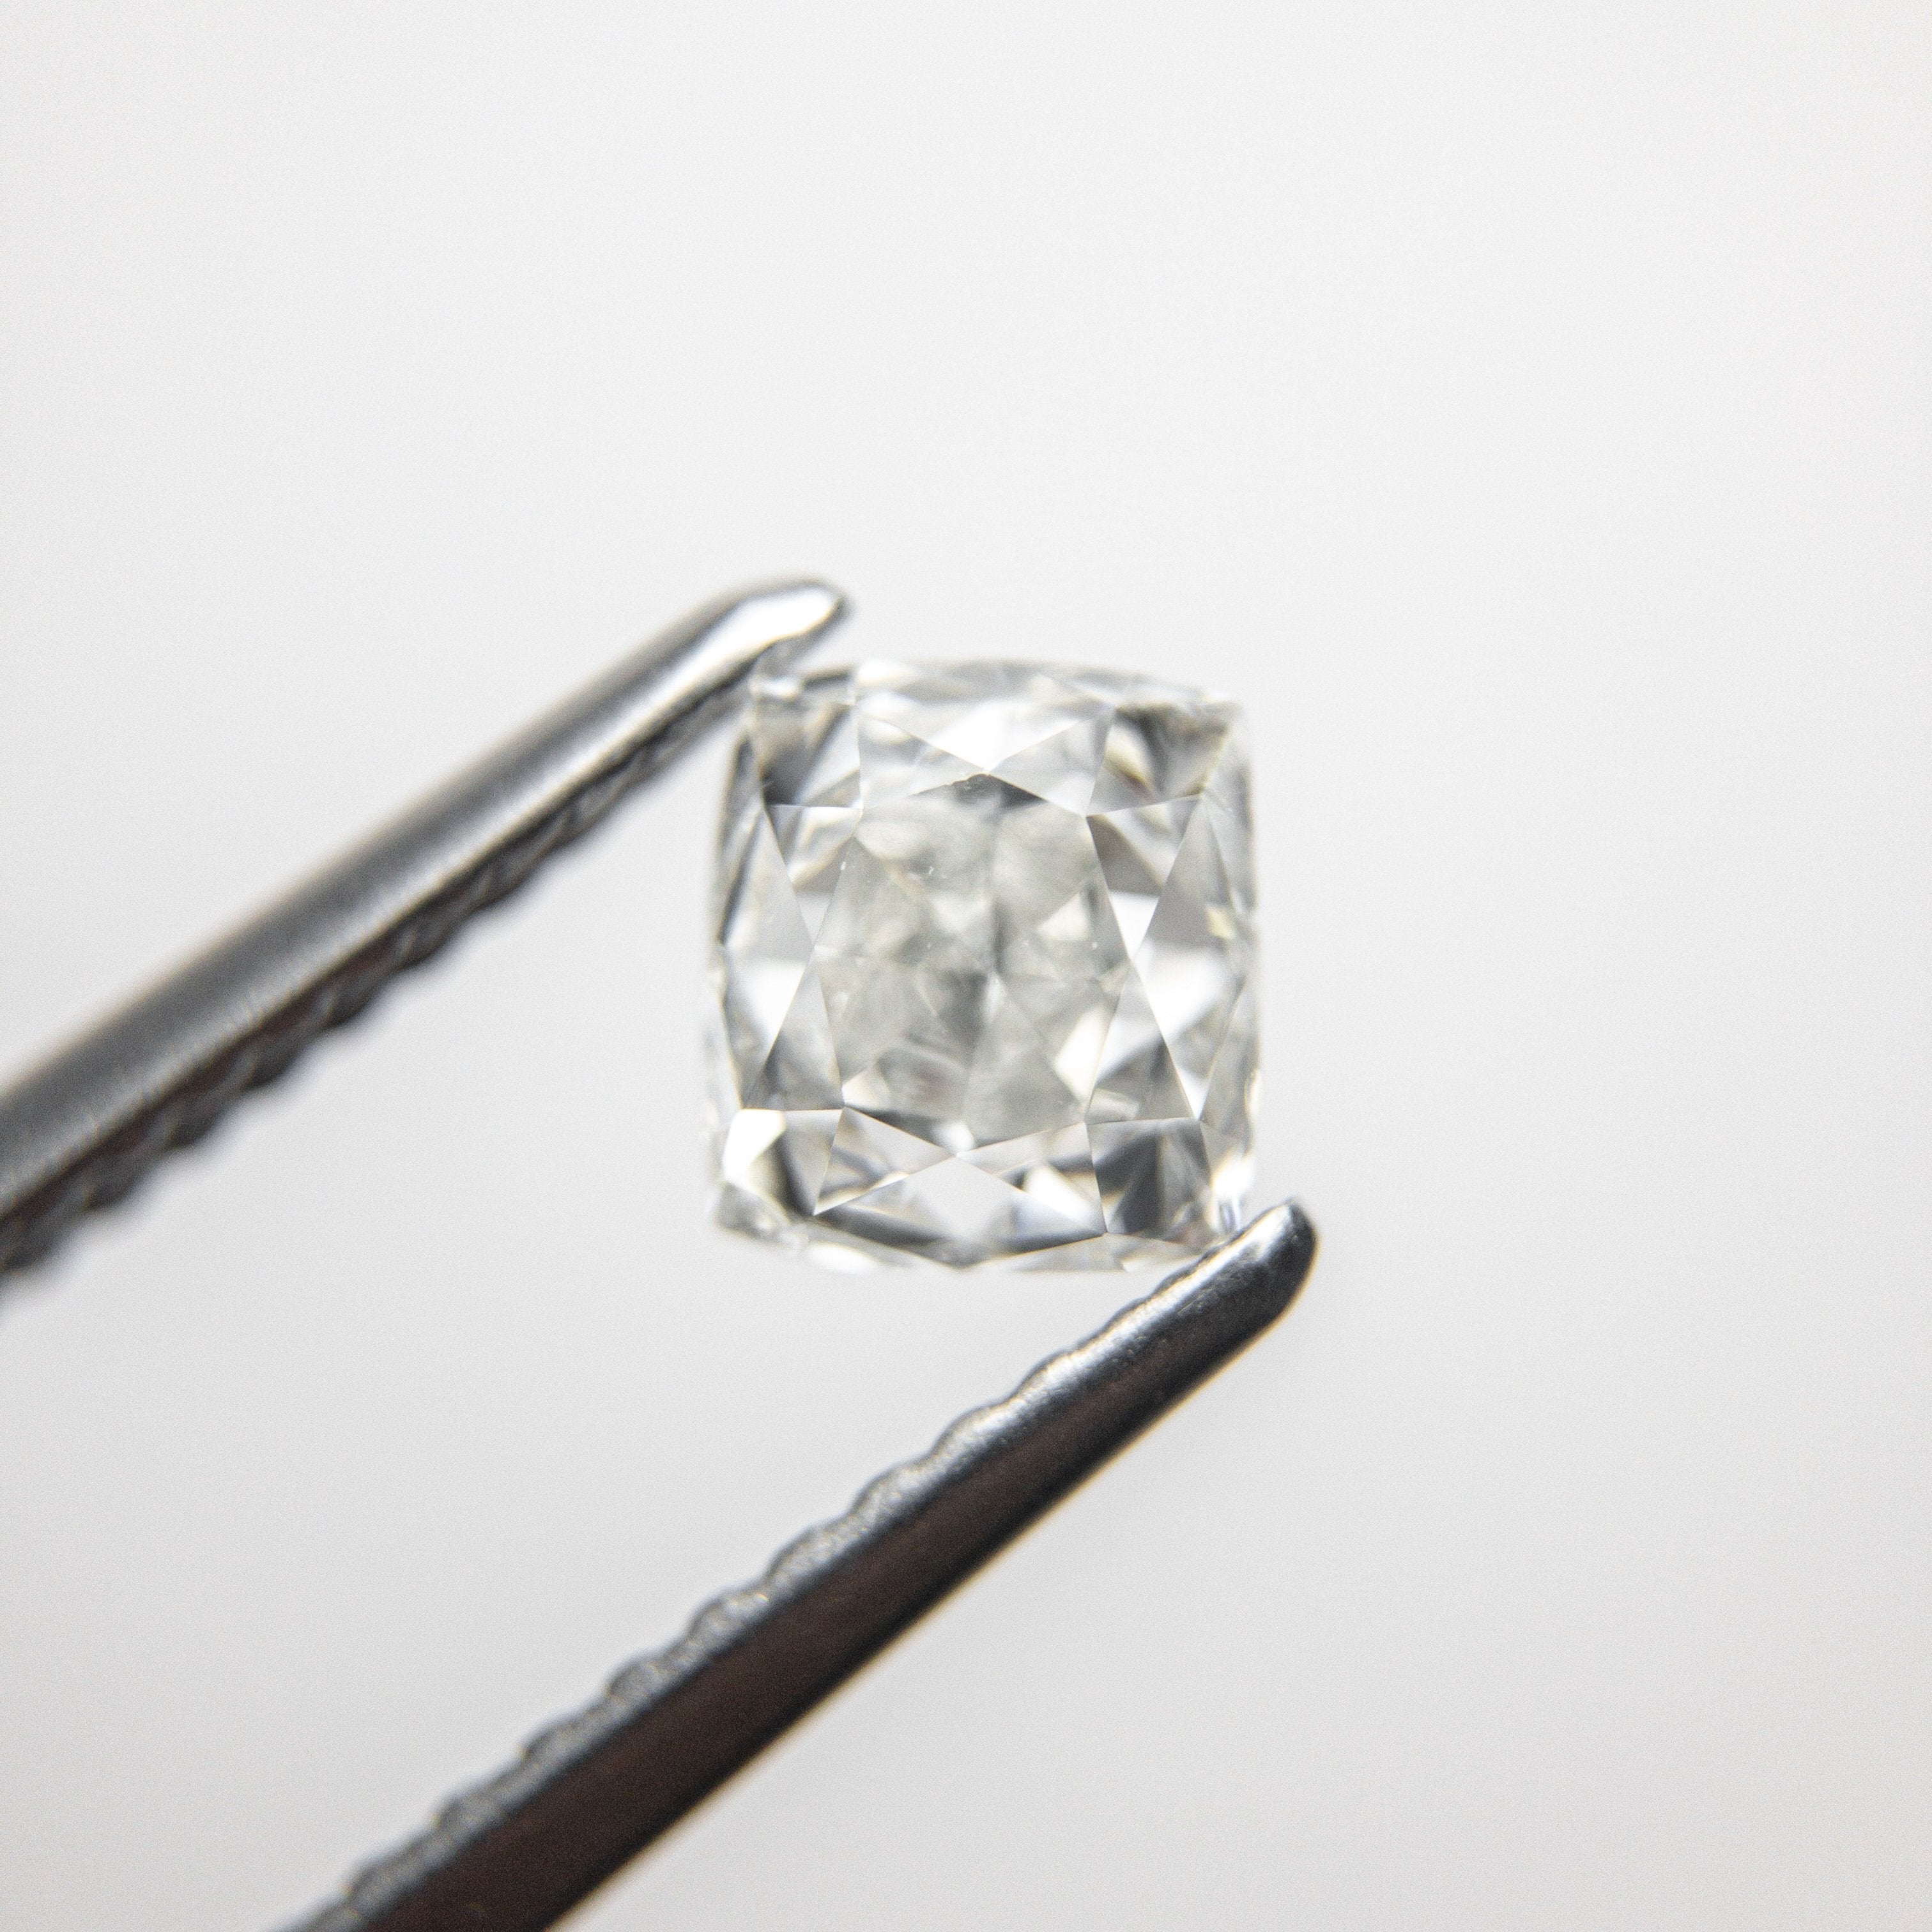 1.05ct 5.38x4.86x4.59mm GIA I1 G Antique French Cut 18390-01 HOLD D1583